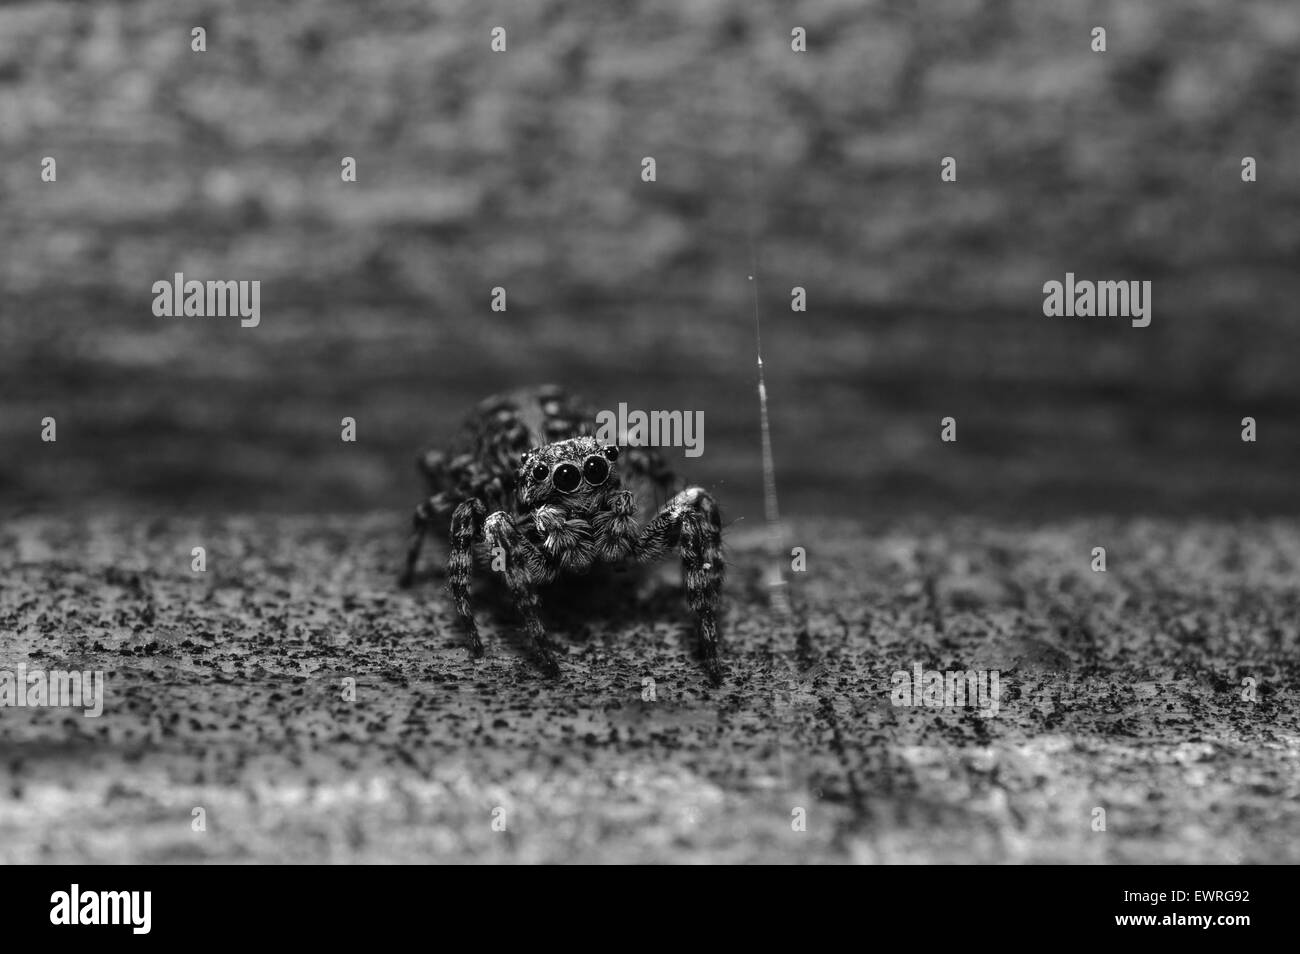 close up photograph of jumper spider Stock Photo